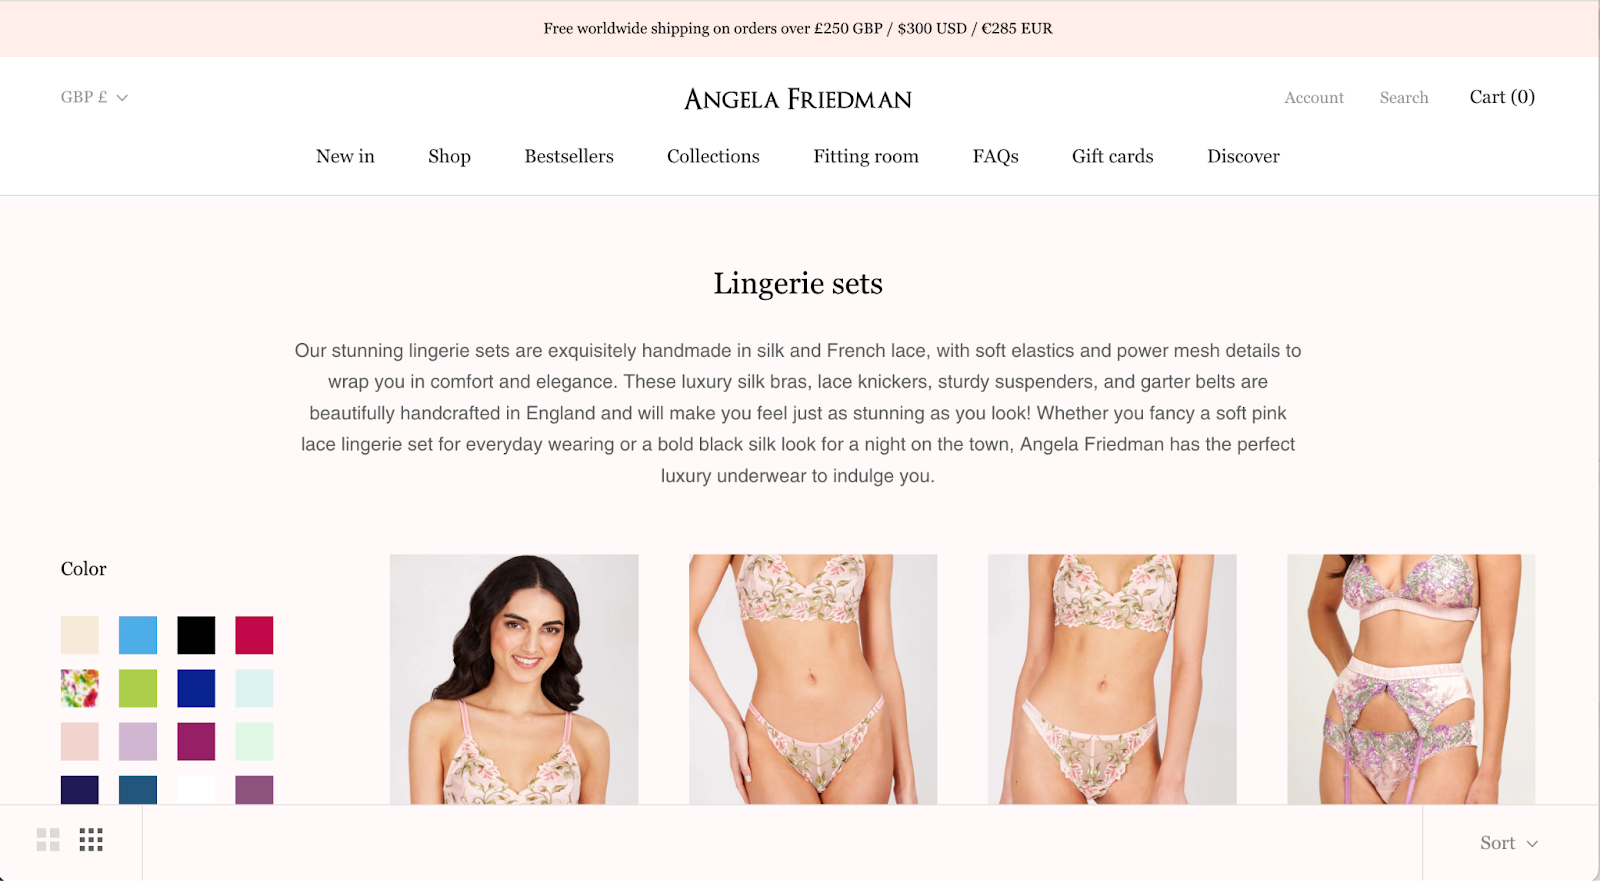 Angela Friedman website is designed almost entirely in pink, but also leans into white space.